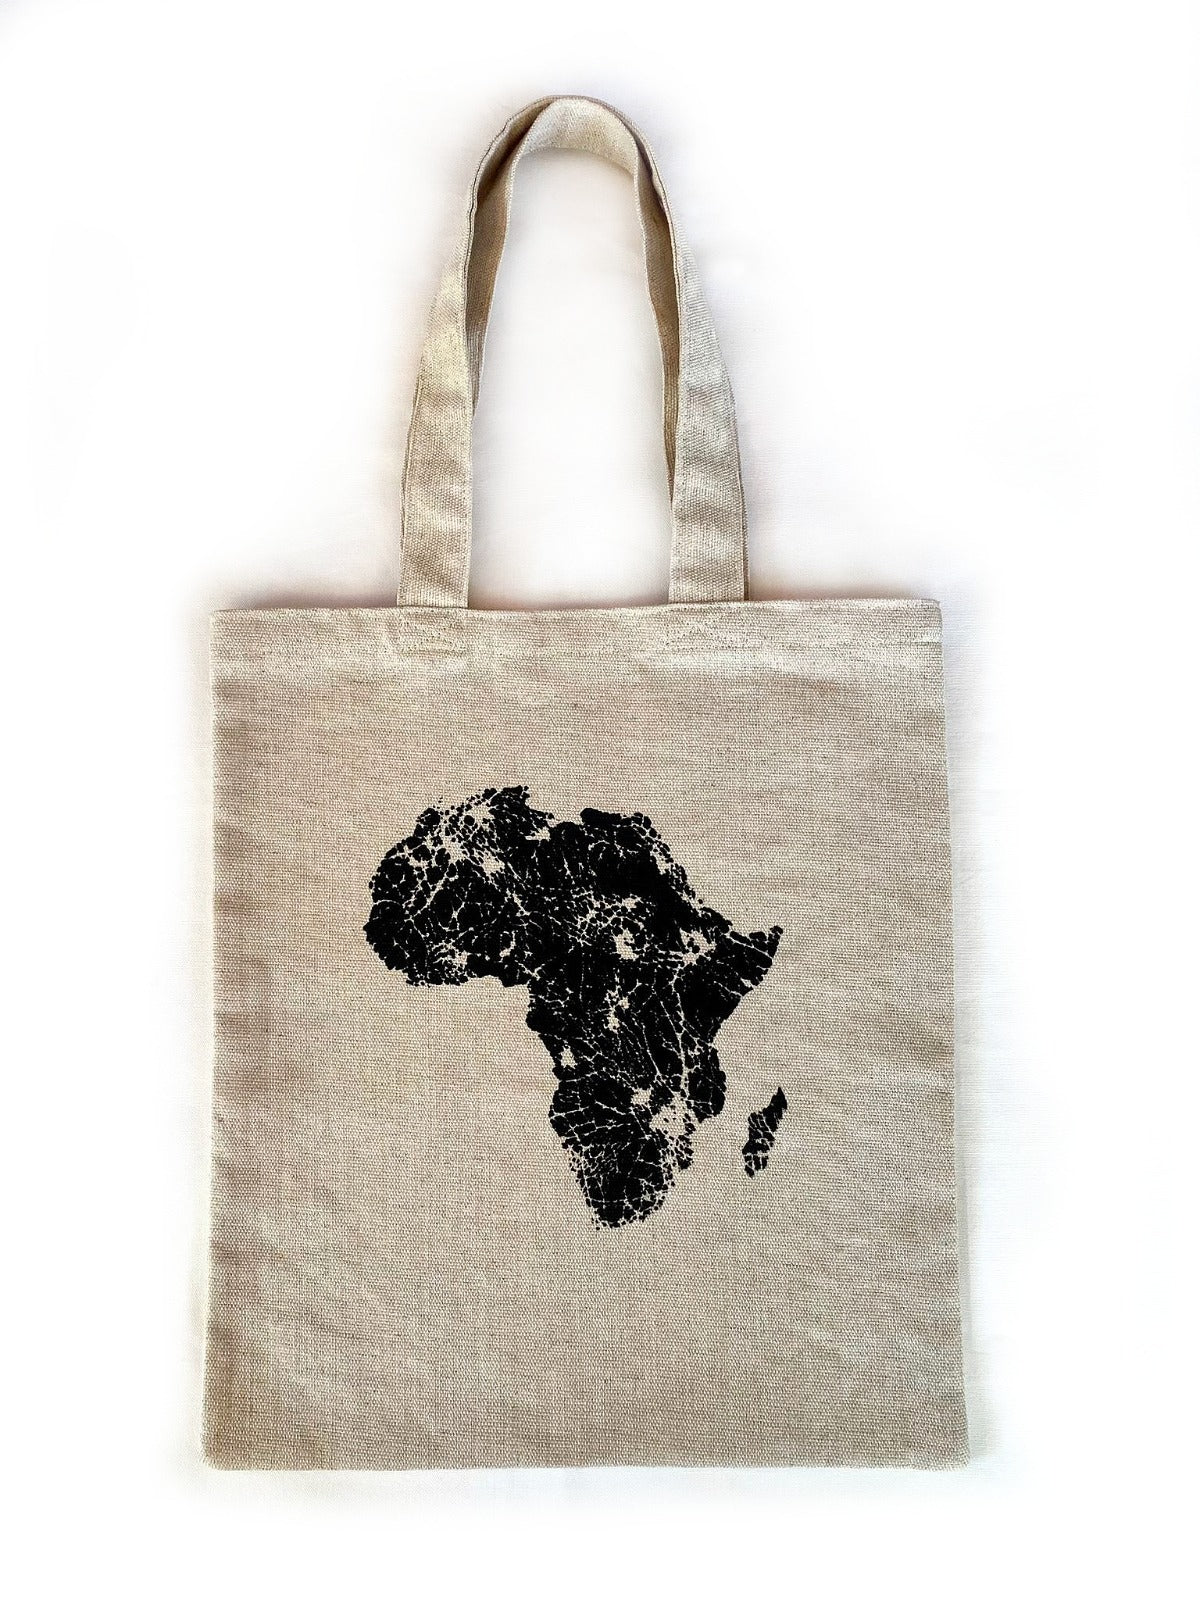 Africa Tote Bag (Limited Edition) - Handmade by TRIBAL TEXTILES - Handcrafted Home Decor Interiors - African Made